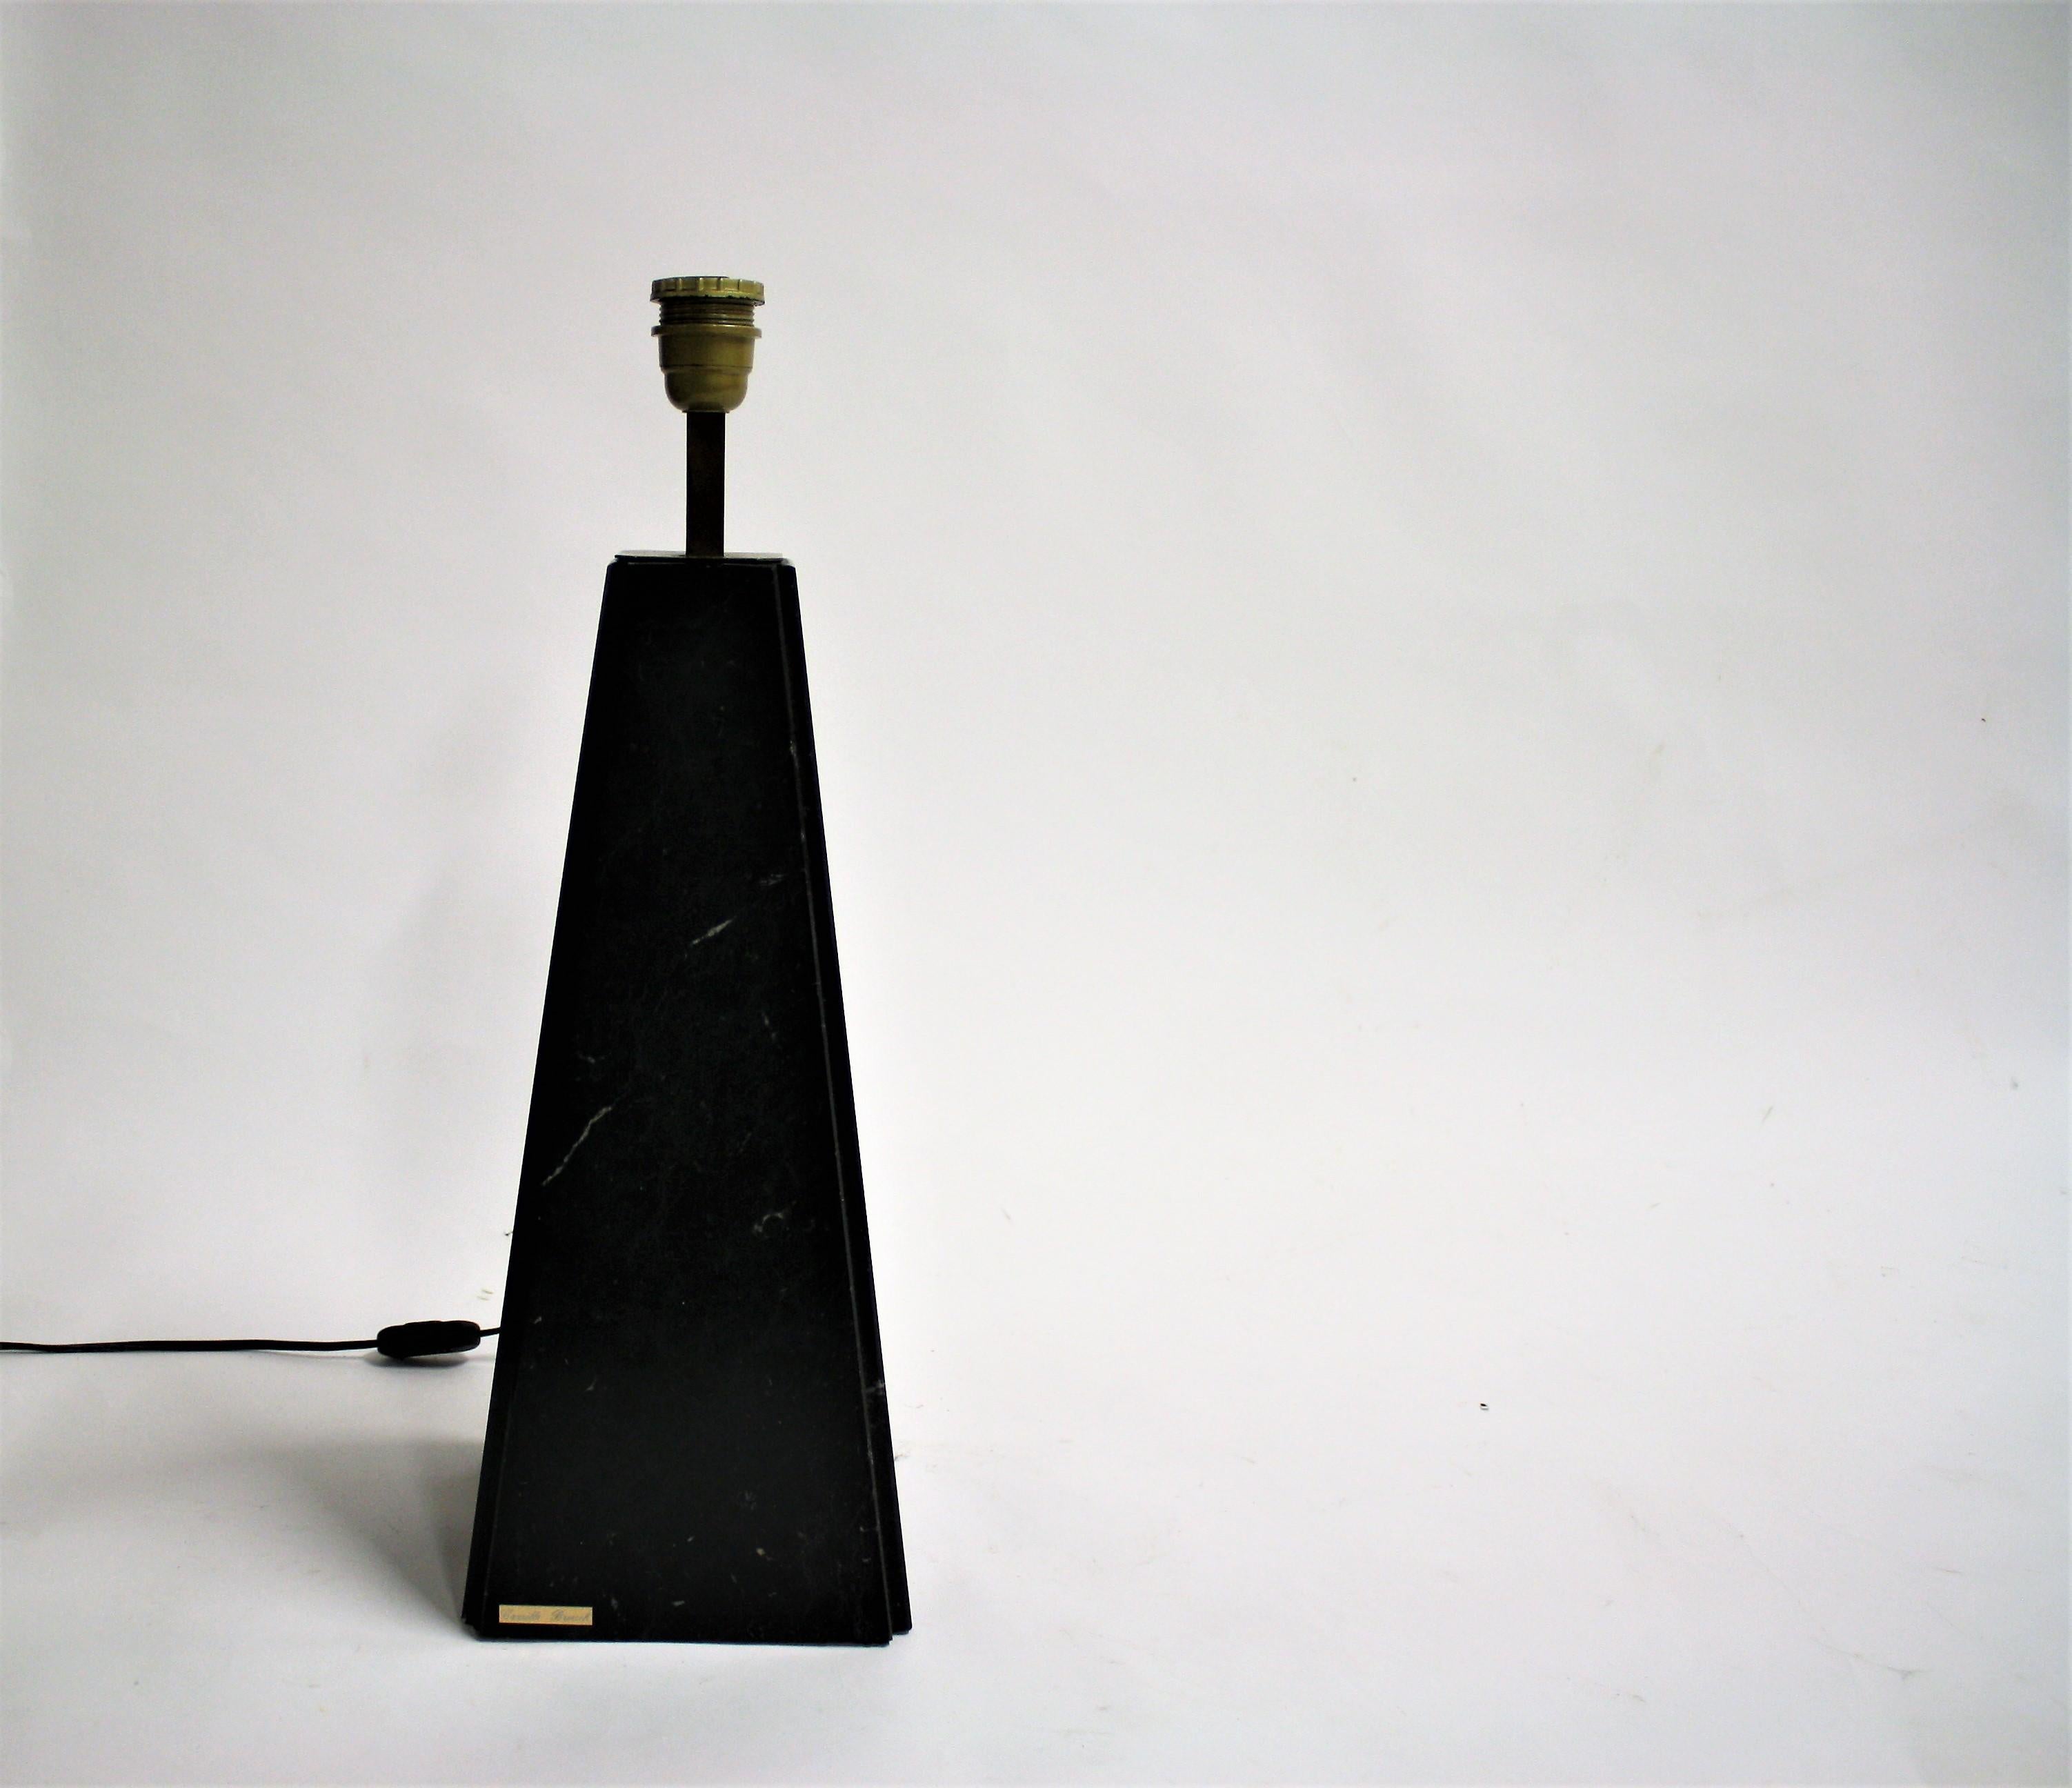 Large black marble table lamp with brass.

The lamp was designed and manufactured by Belgian artisan Camille Breesch.

Rewired, tested and ready for use with a regular E26/E27 light bulb.

Original lamp shade included, although showing some